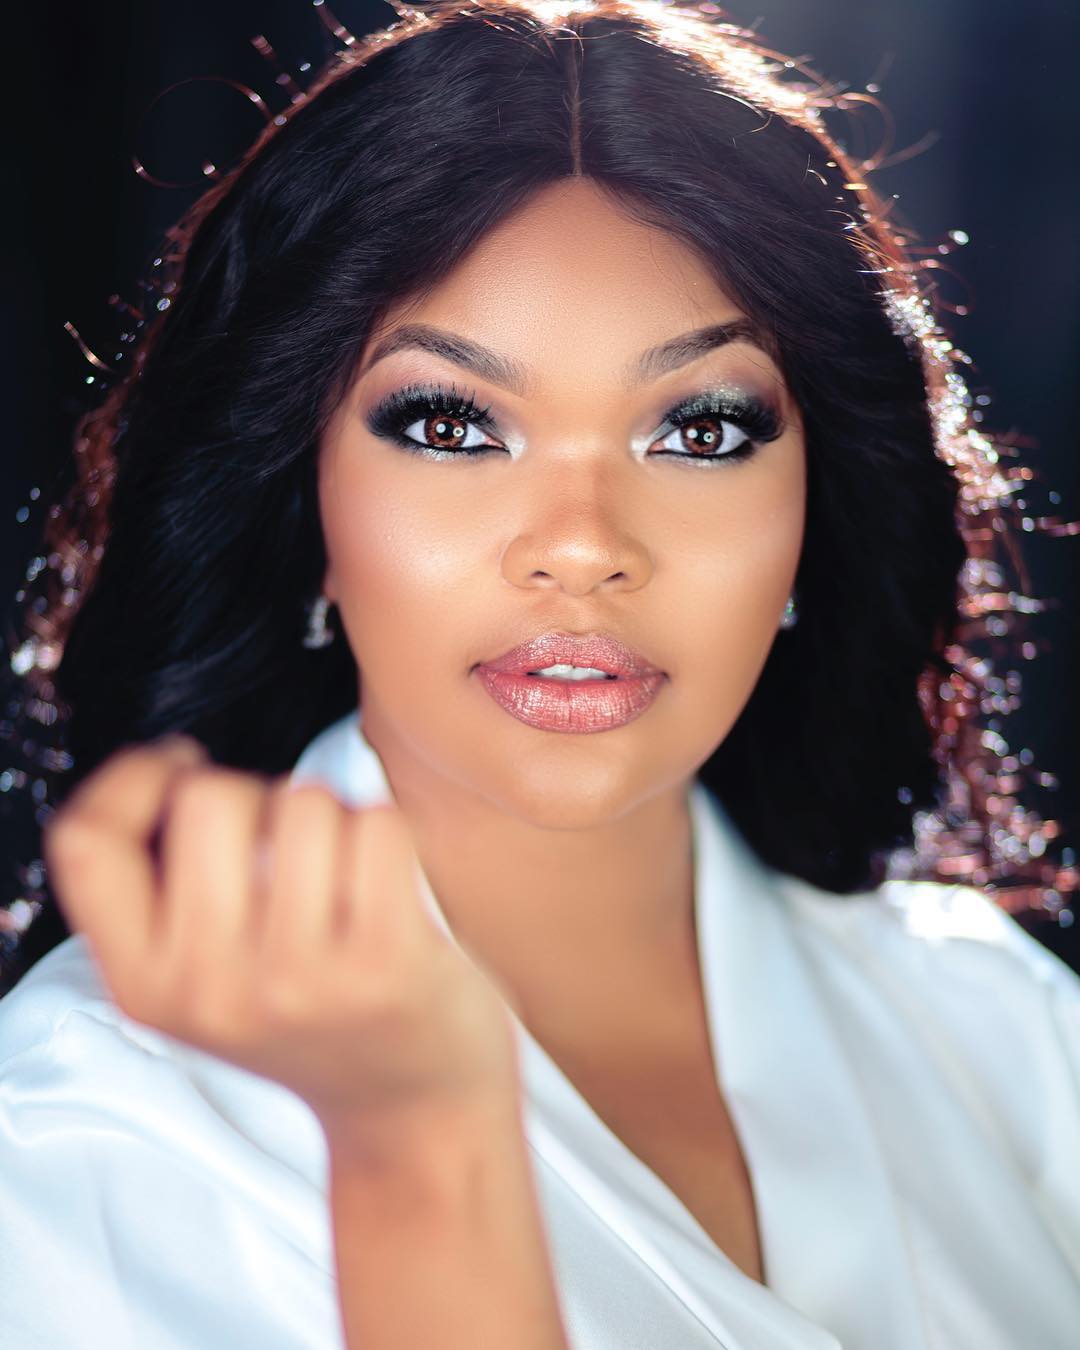 Wema Sepetu throws shade to all Tanzanian women as she reclaims her throne with new photos